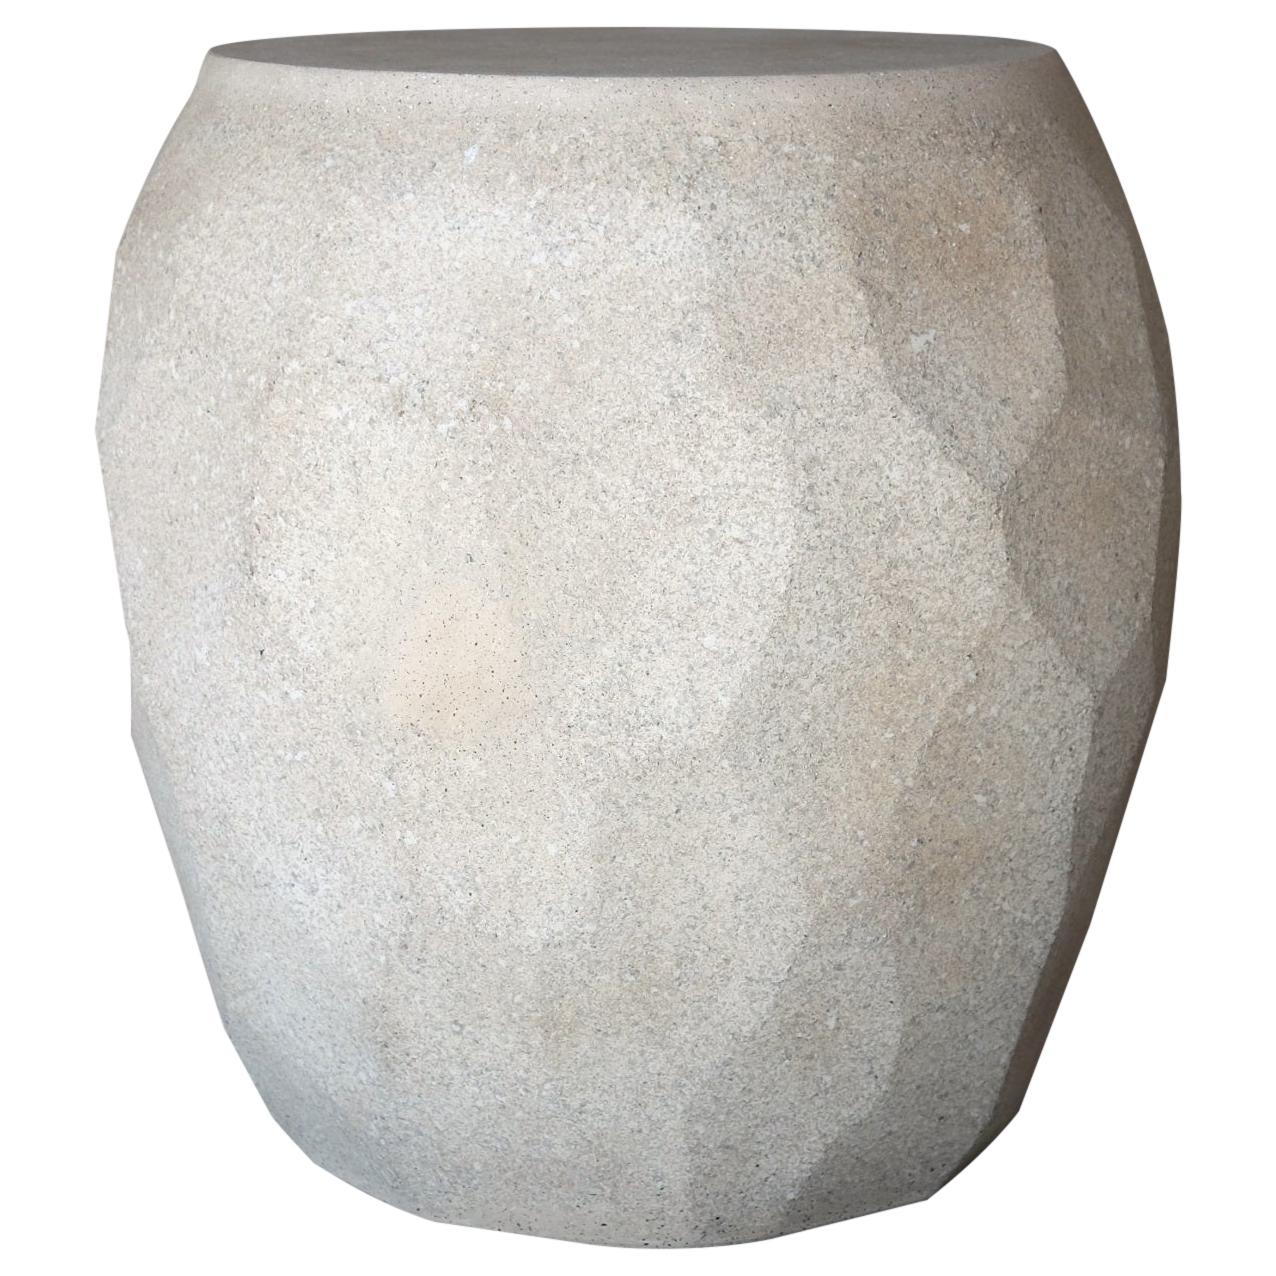 Cast Resin 'Facet' Side Table, Aged Stone Finish by Zachary A. Design For Sale